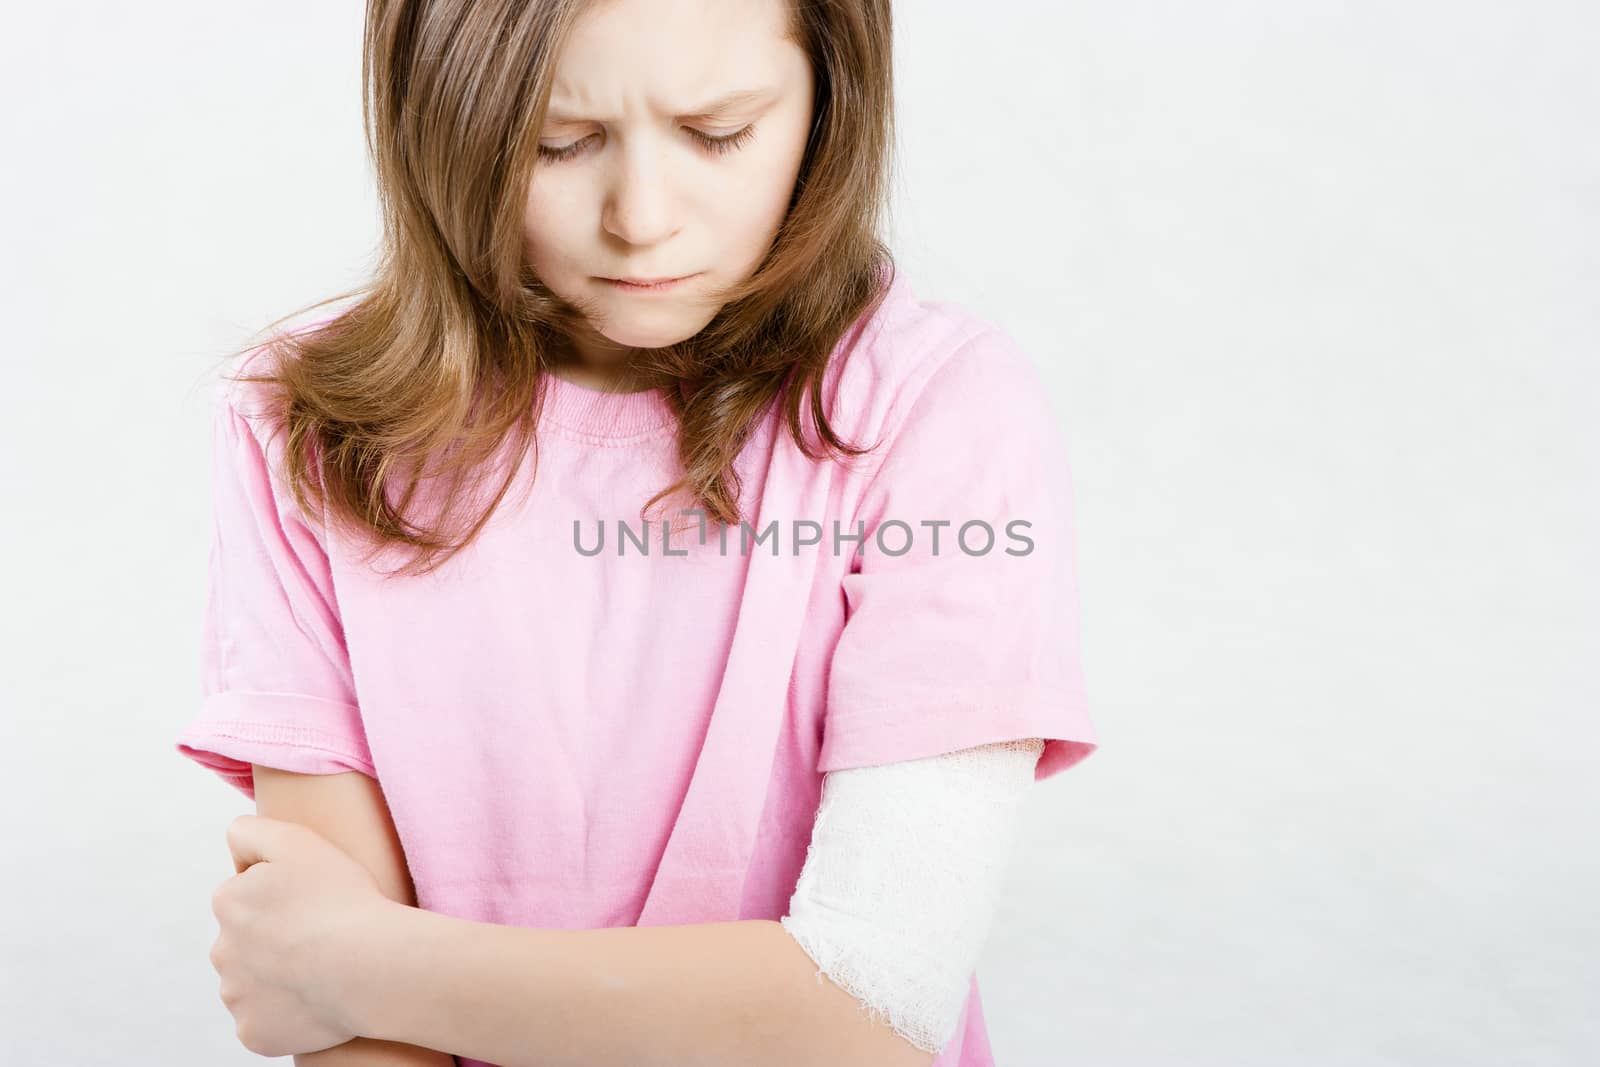 The sad girl with a bandage on his hand. Injury limbs child